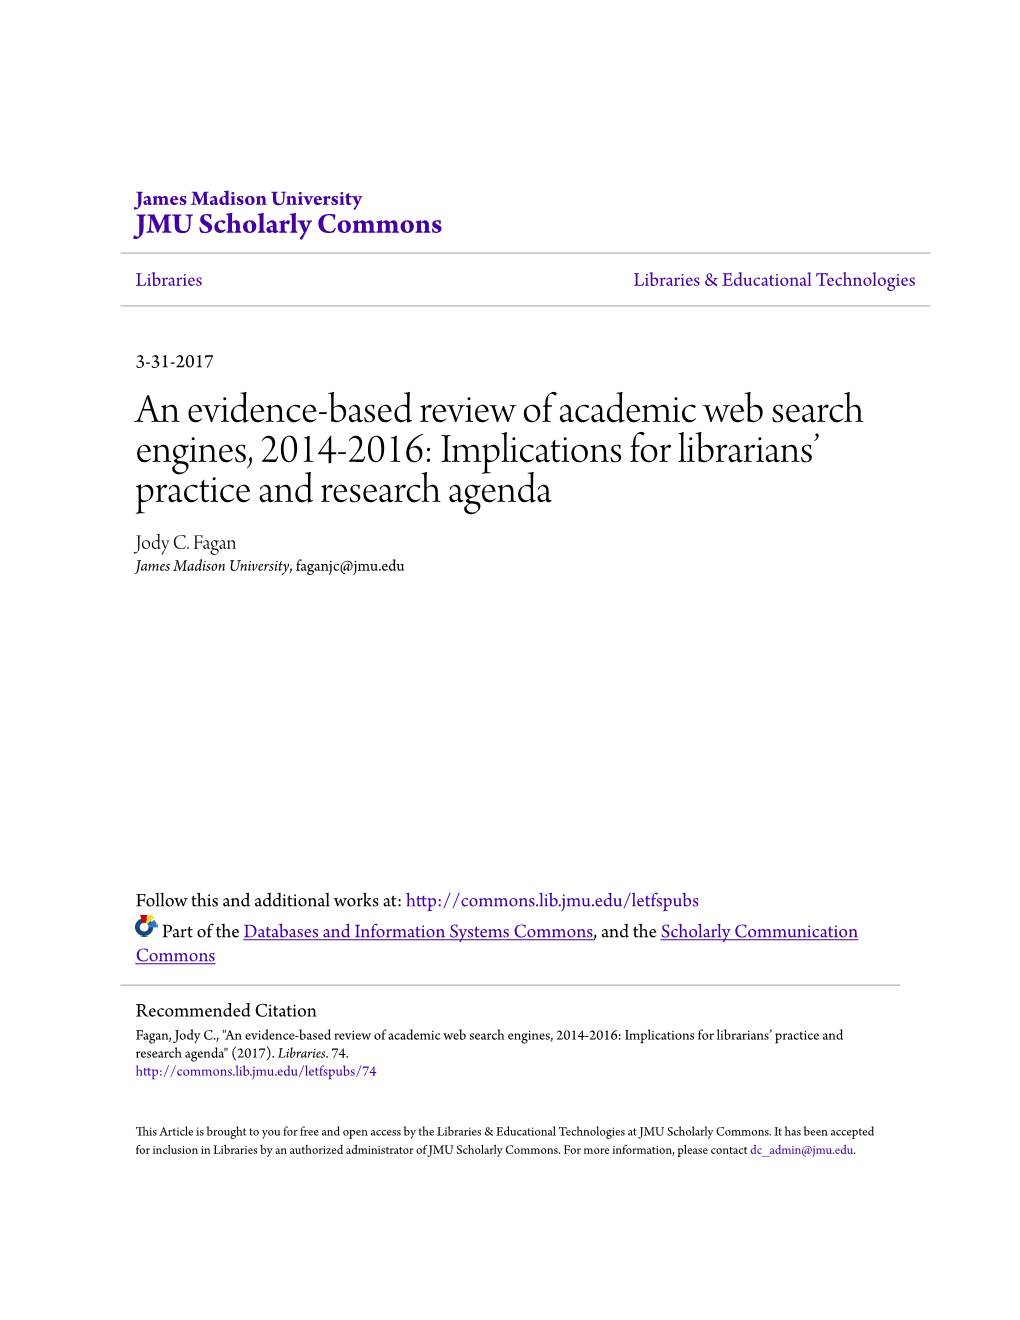 An Evidence-Based Review of Academic Web Search Engines, 2014-2016: Implications for Librarians’ Practice and Research Agenda Jody C